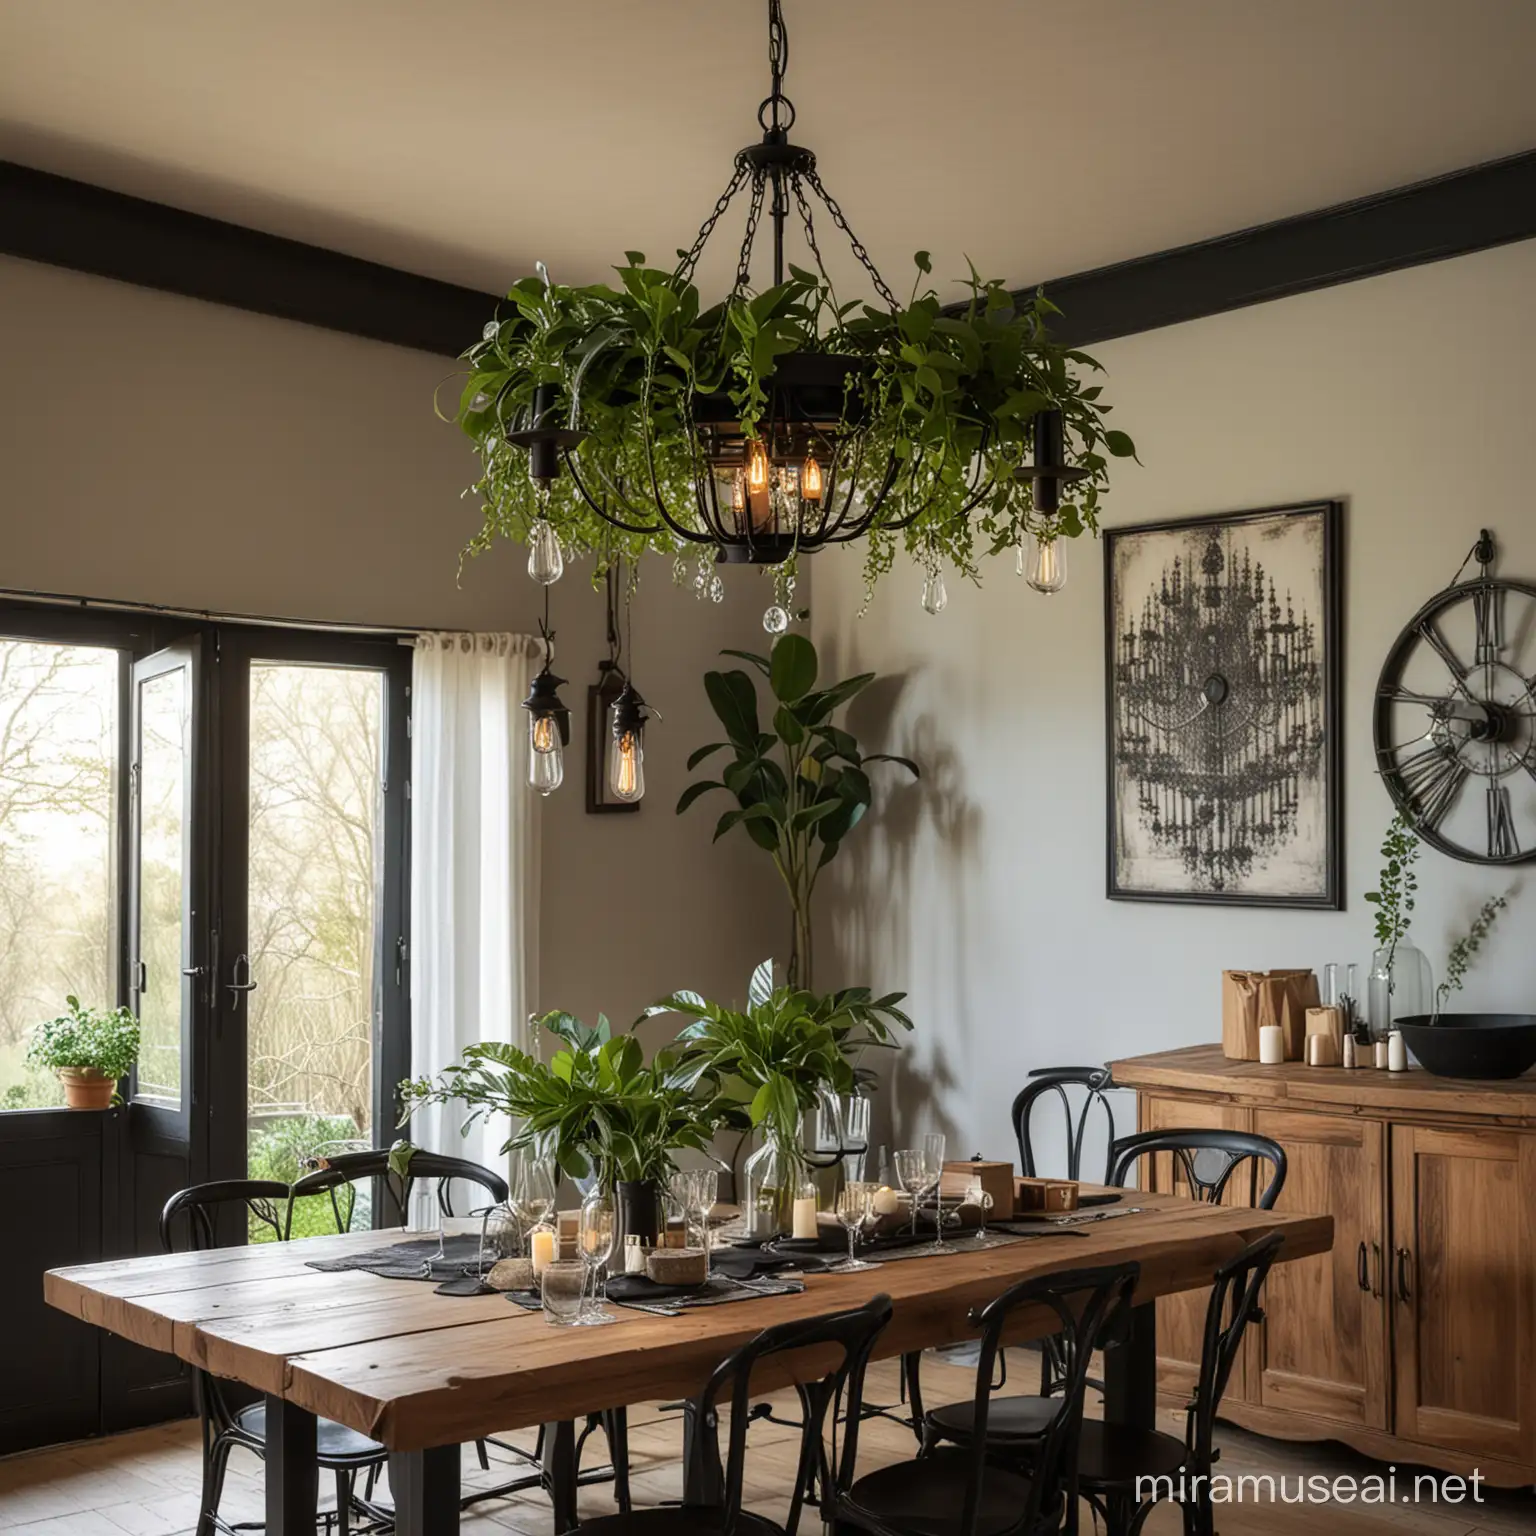 Gothic Steampunk Black Metal Chandelier Over Wooden Dining Table with Hanging Plants